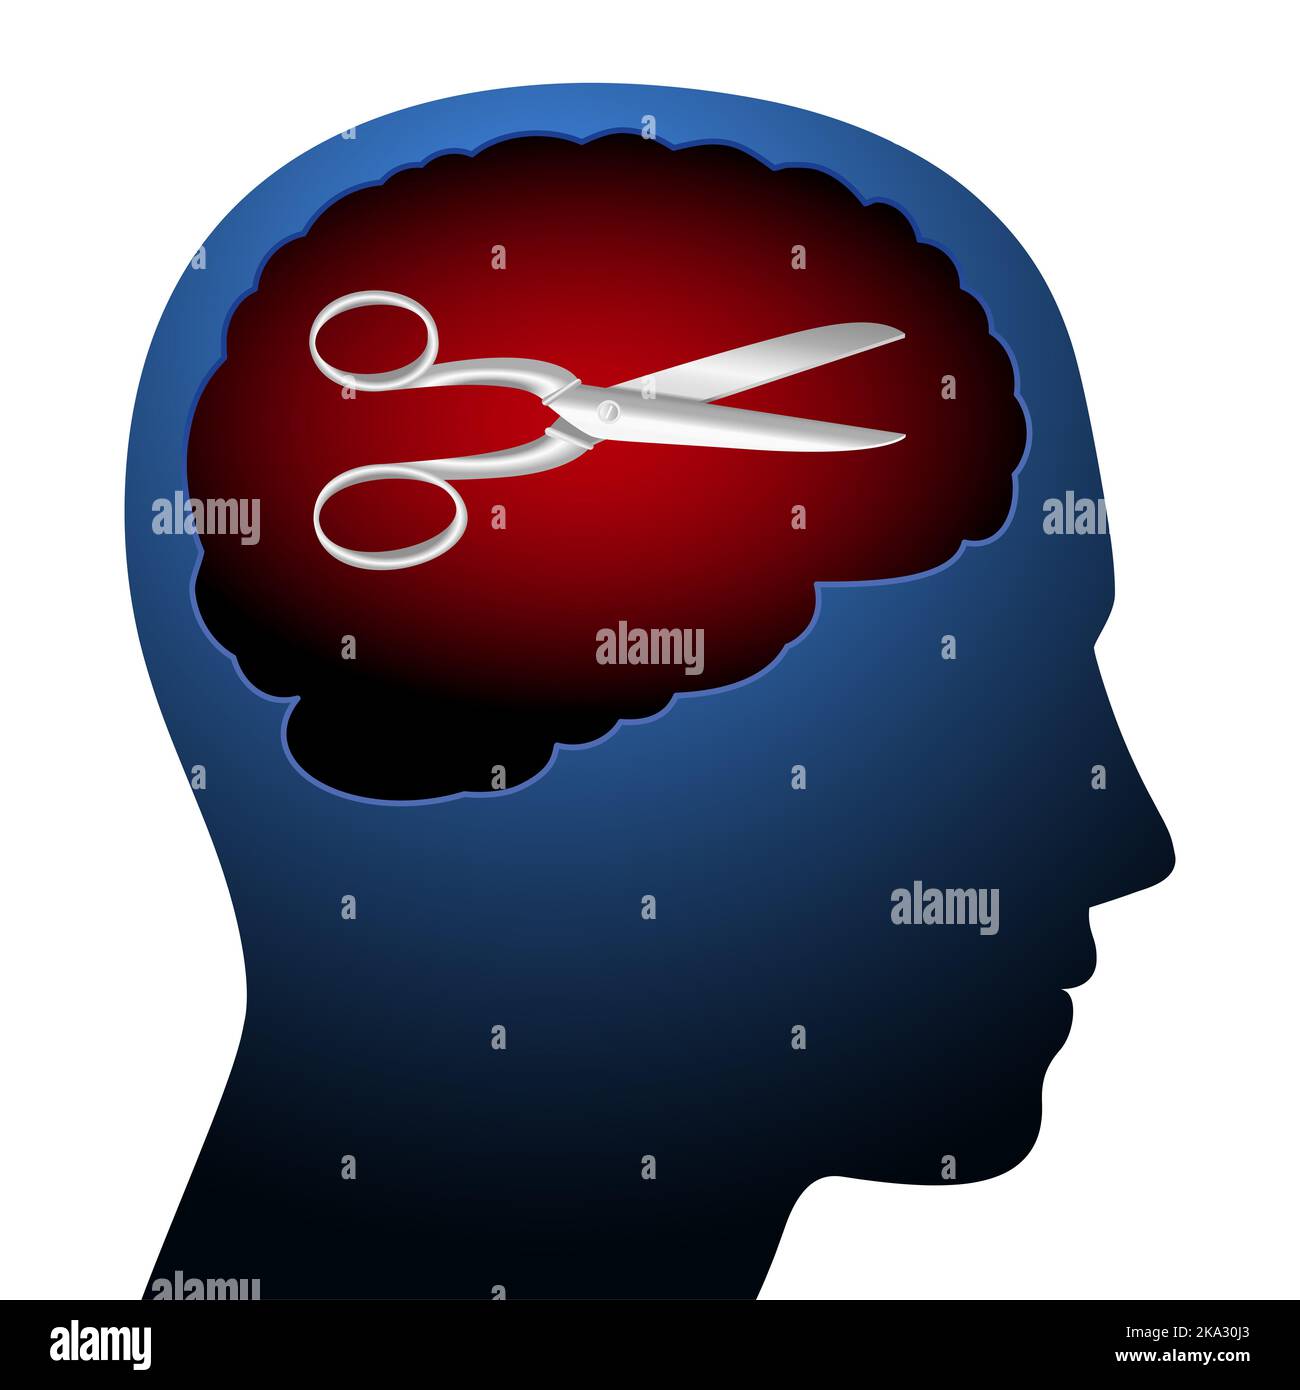 The scissors in the head, symbol for self-censorship. Metaphor used in German speaking area for the act of censoring or classifying the own discourse. Stock Photo